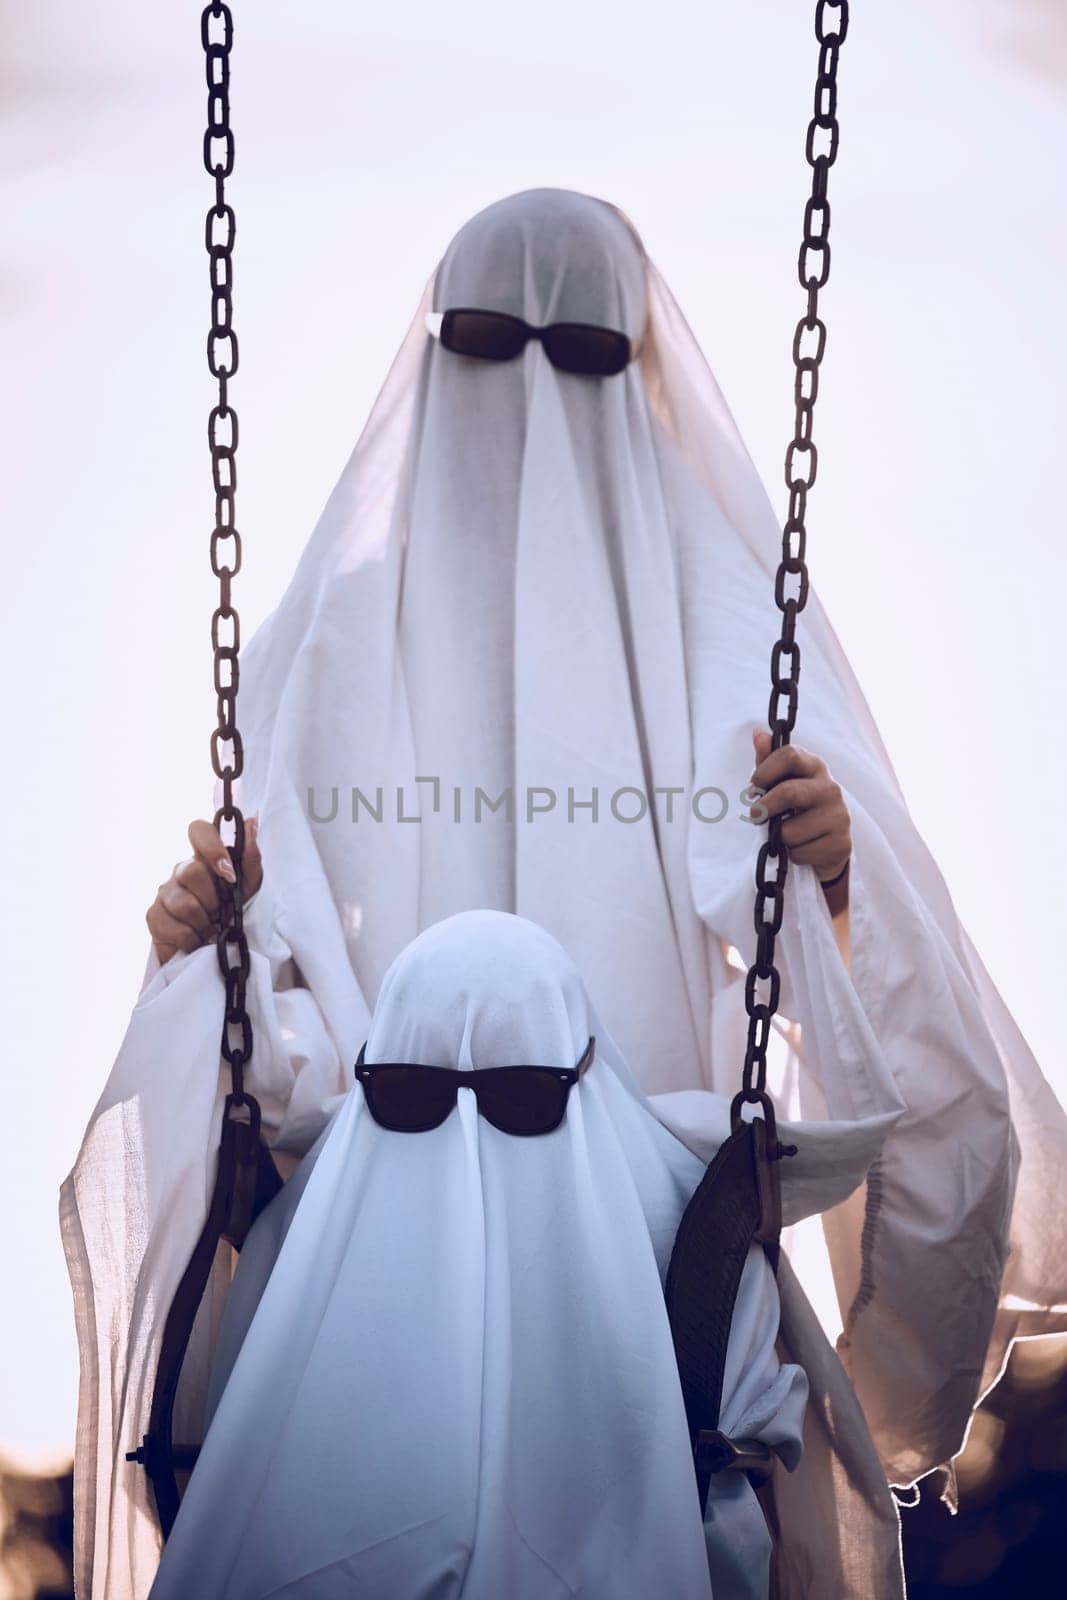 Halloween, ghost and family wearing white sheet and sunglasses costume at an outdoor park with child on a swing at playground. Horror, scary and celebrate fun holiday with creative woman and kid by YuriArcurs